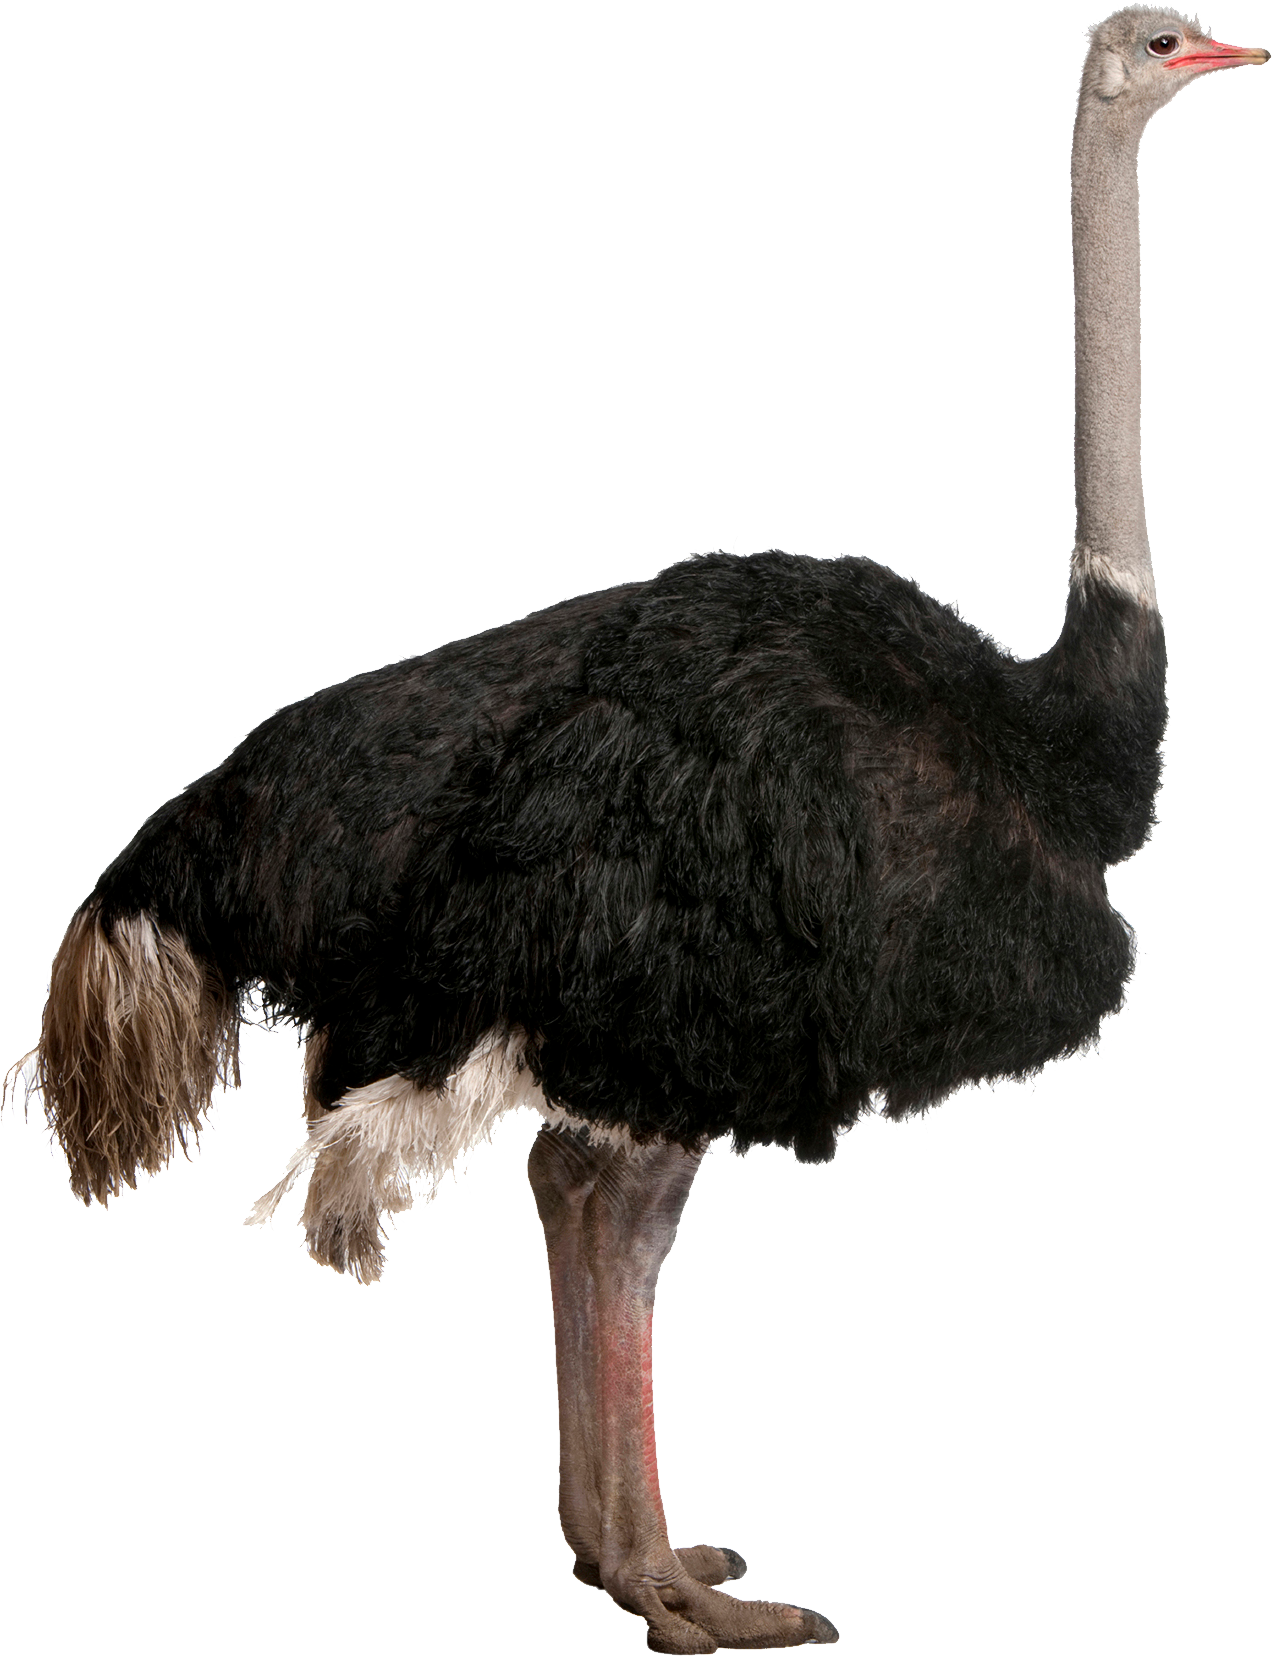 A Black Ostrich With Long Neck